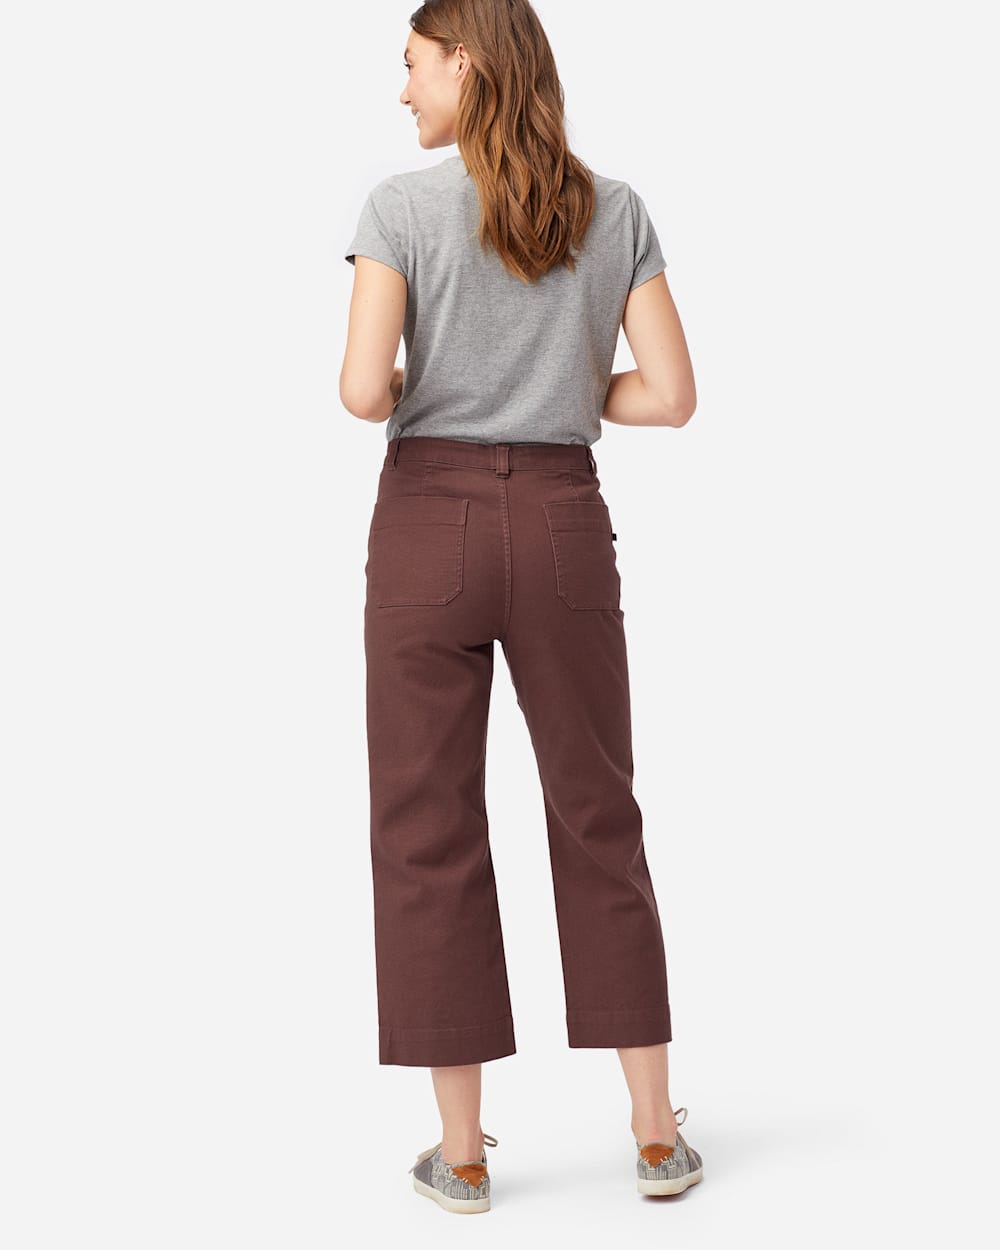 ALTERNATE VIEW OF WOMEN'S HIGH-WAISTED CROPPED PANTS IN RUSTIC PLUM image number 2